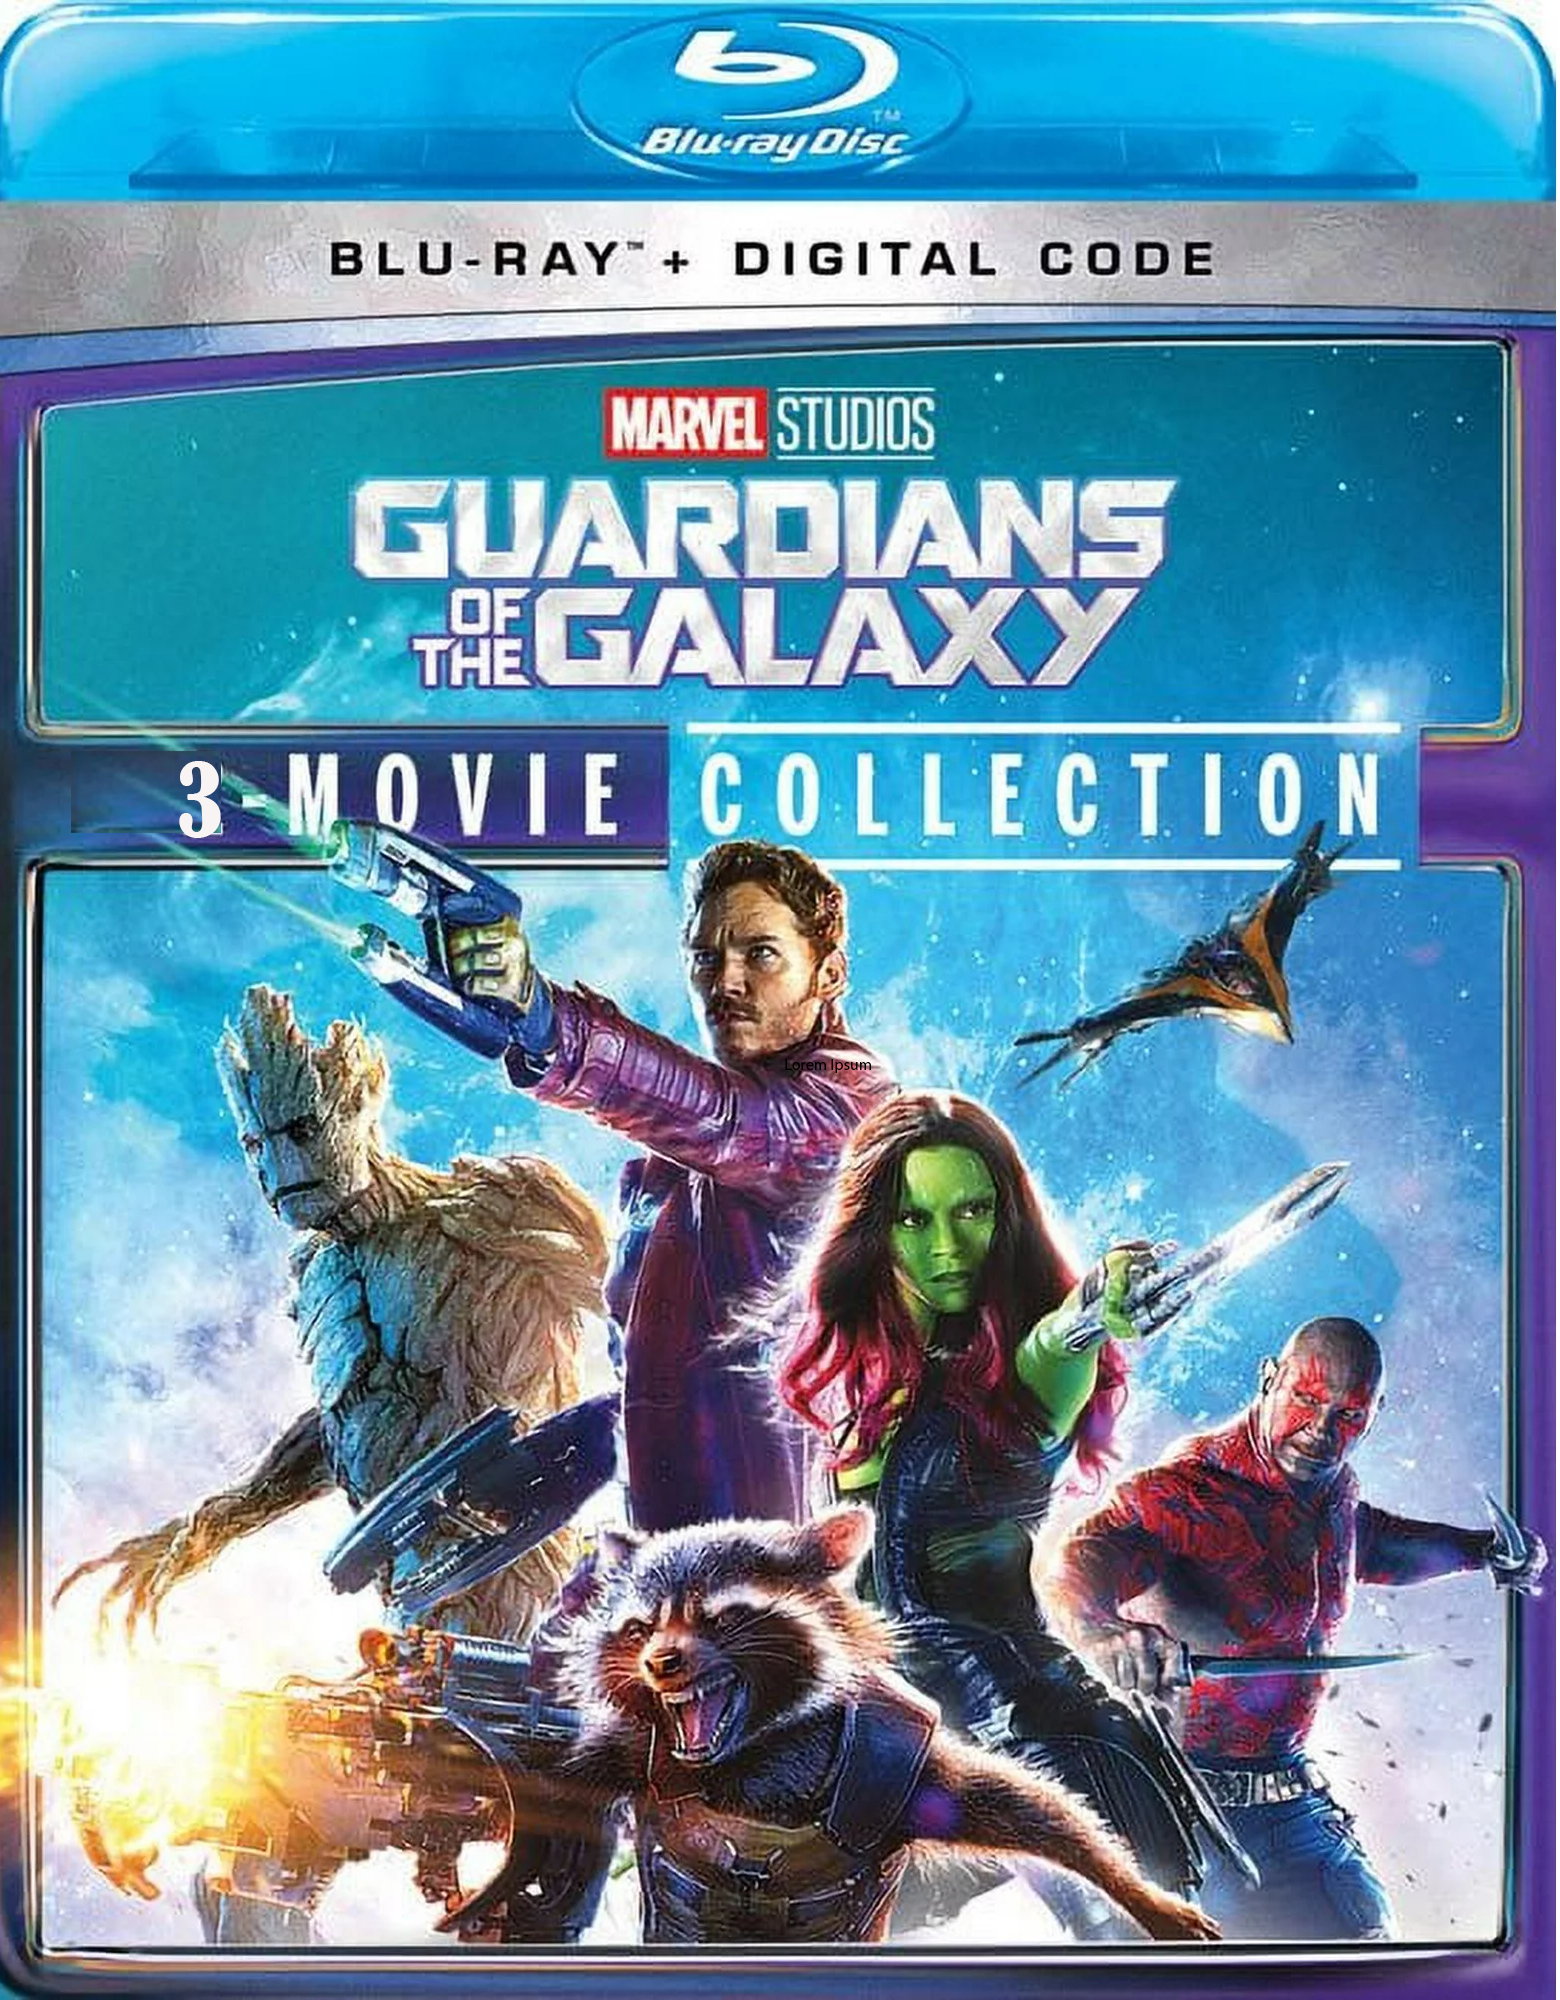 Guardians-of-the-Galaxy-3-Movie-Collecti